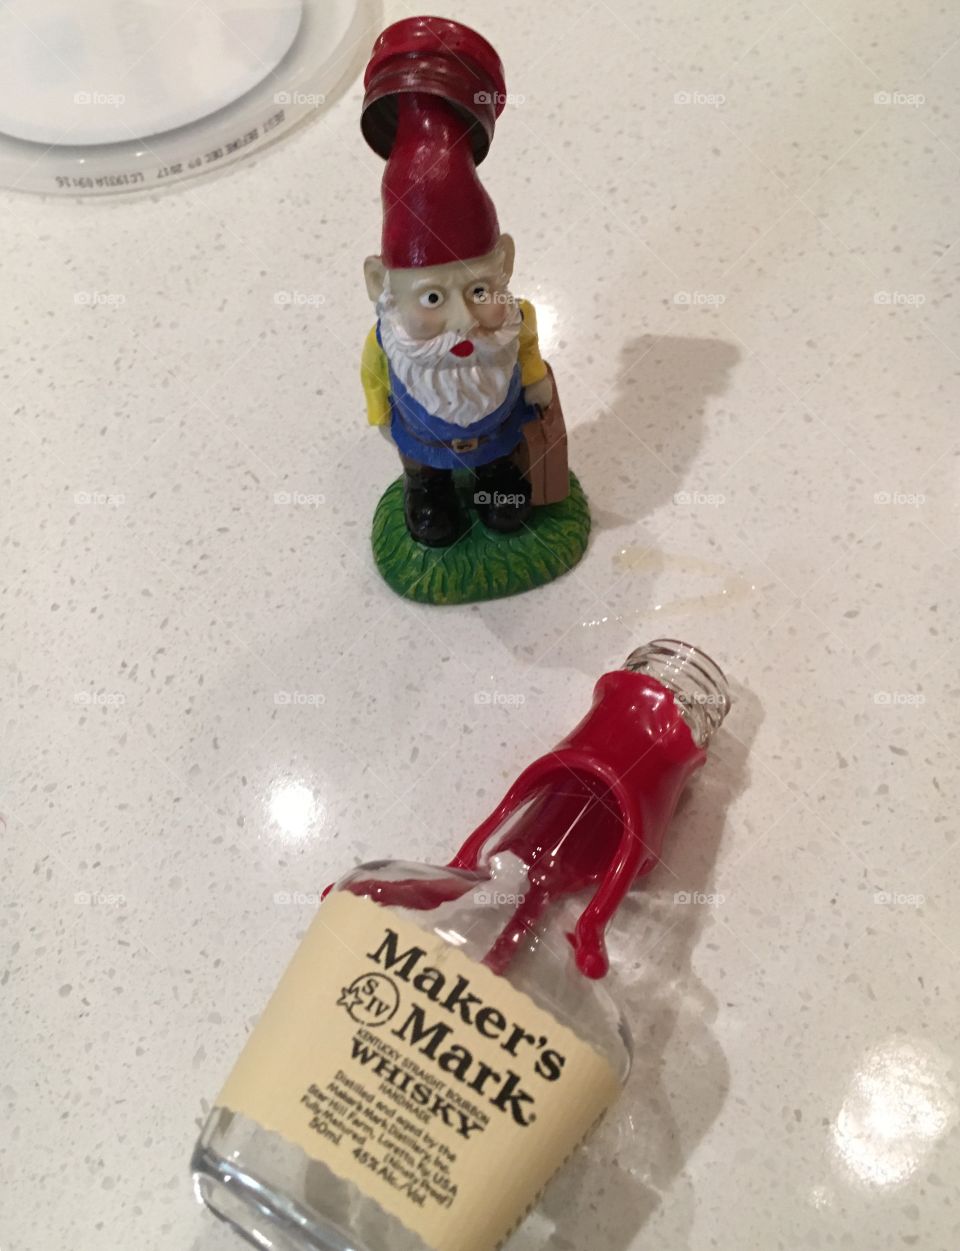 Gnomey hitting the bottle early in a Friday. Frivolous, carefree life of a traveling gnome...